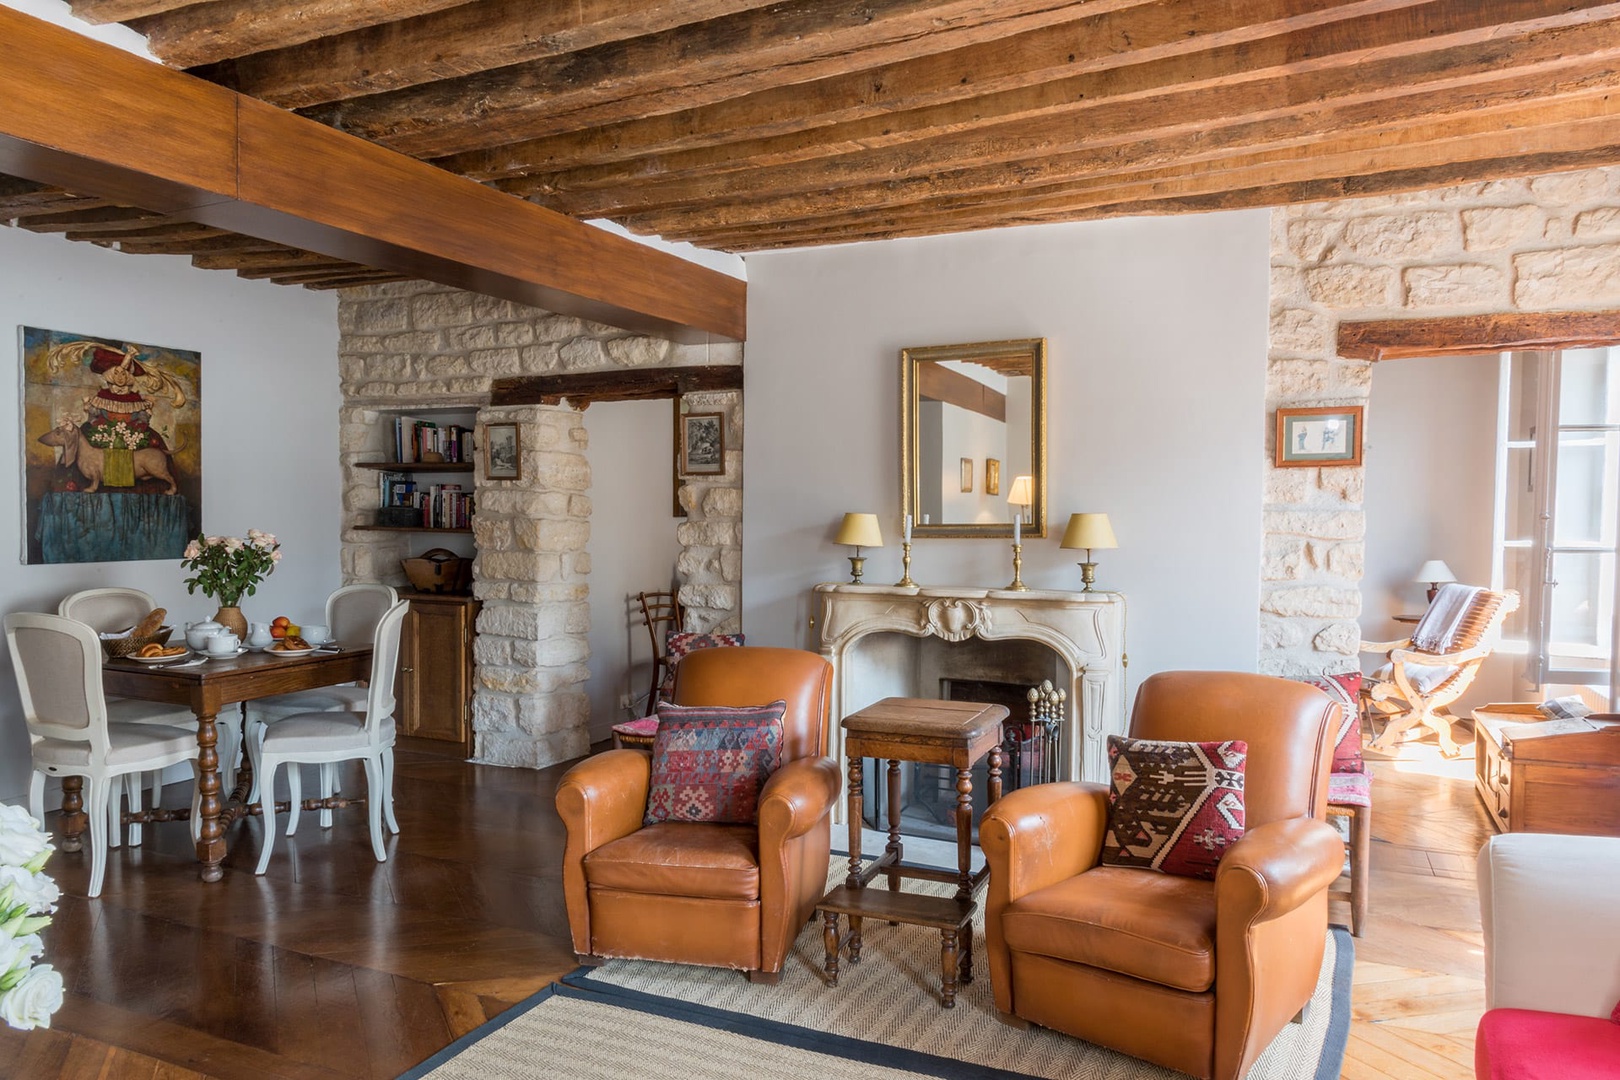 The décor at the Dolcetto perfectly complements the original stone walls.